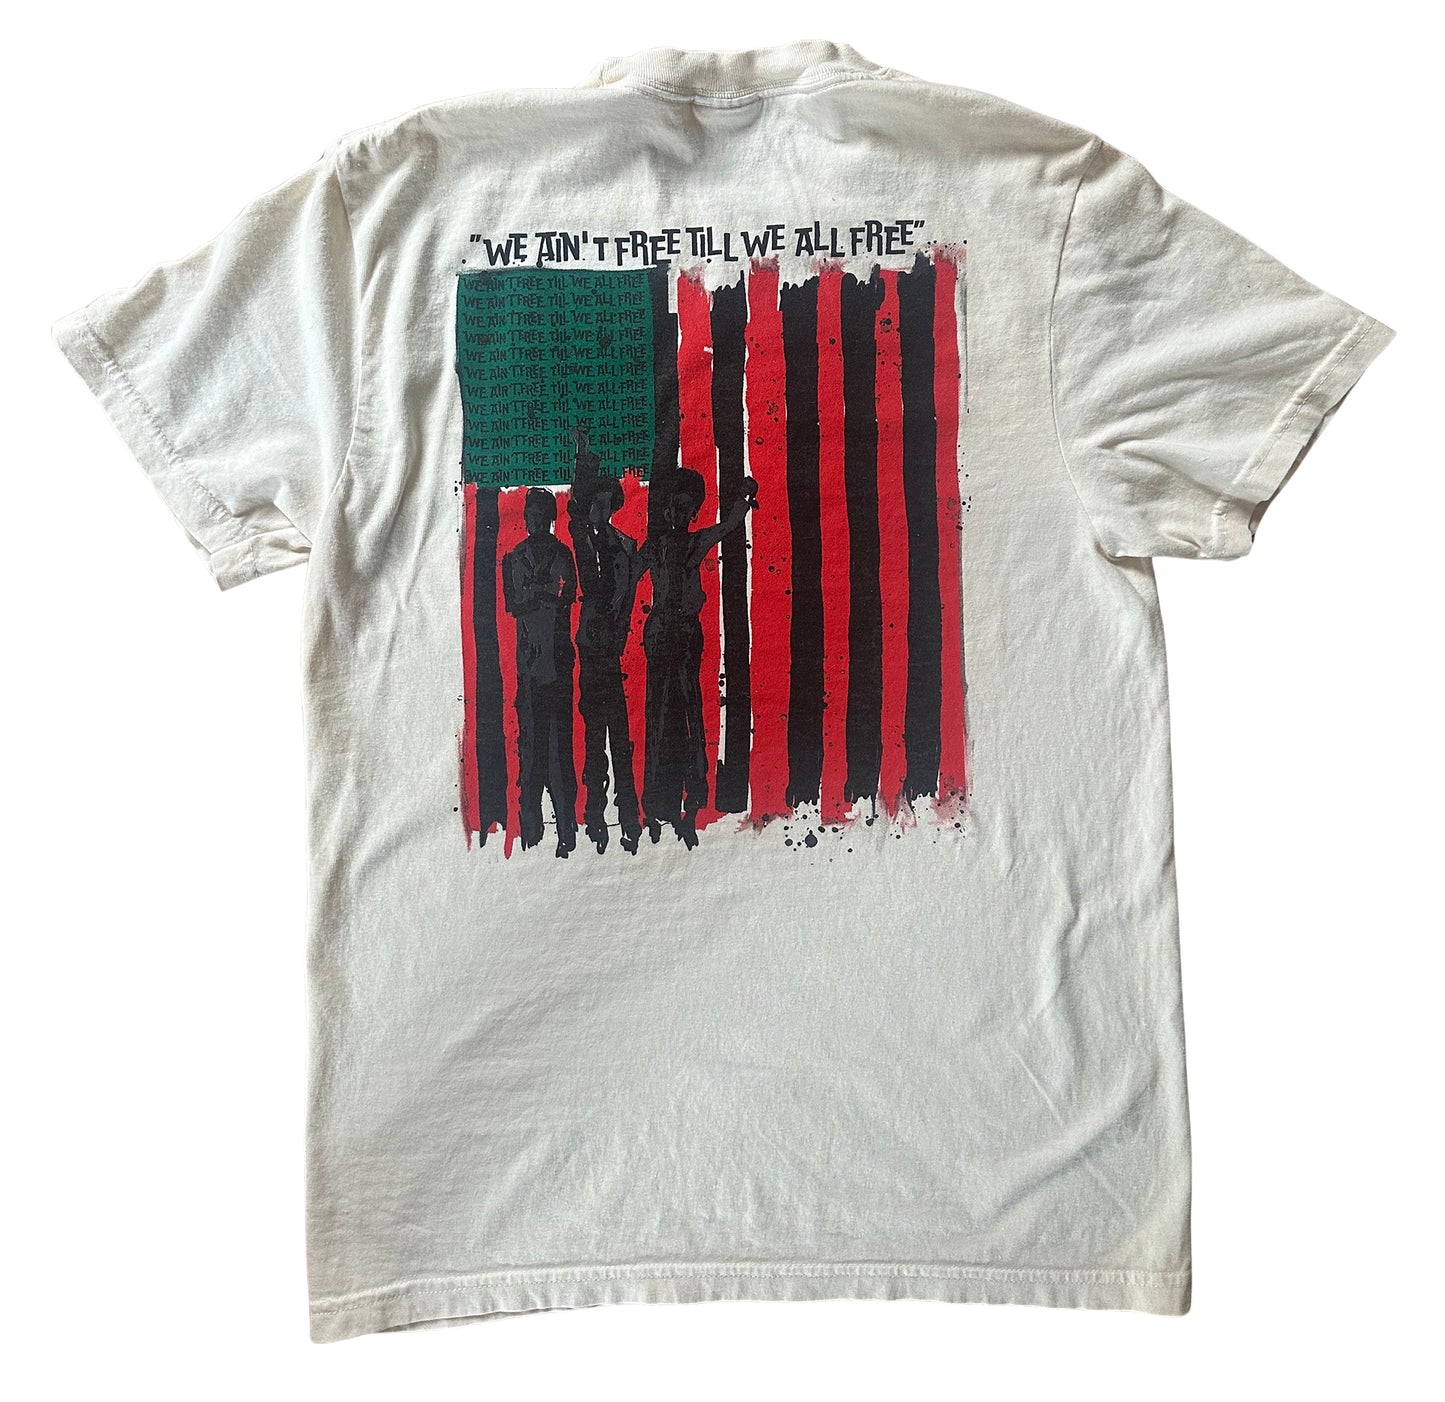 Juneteenth “We Ain’t Free Till We All Free” Tee